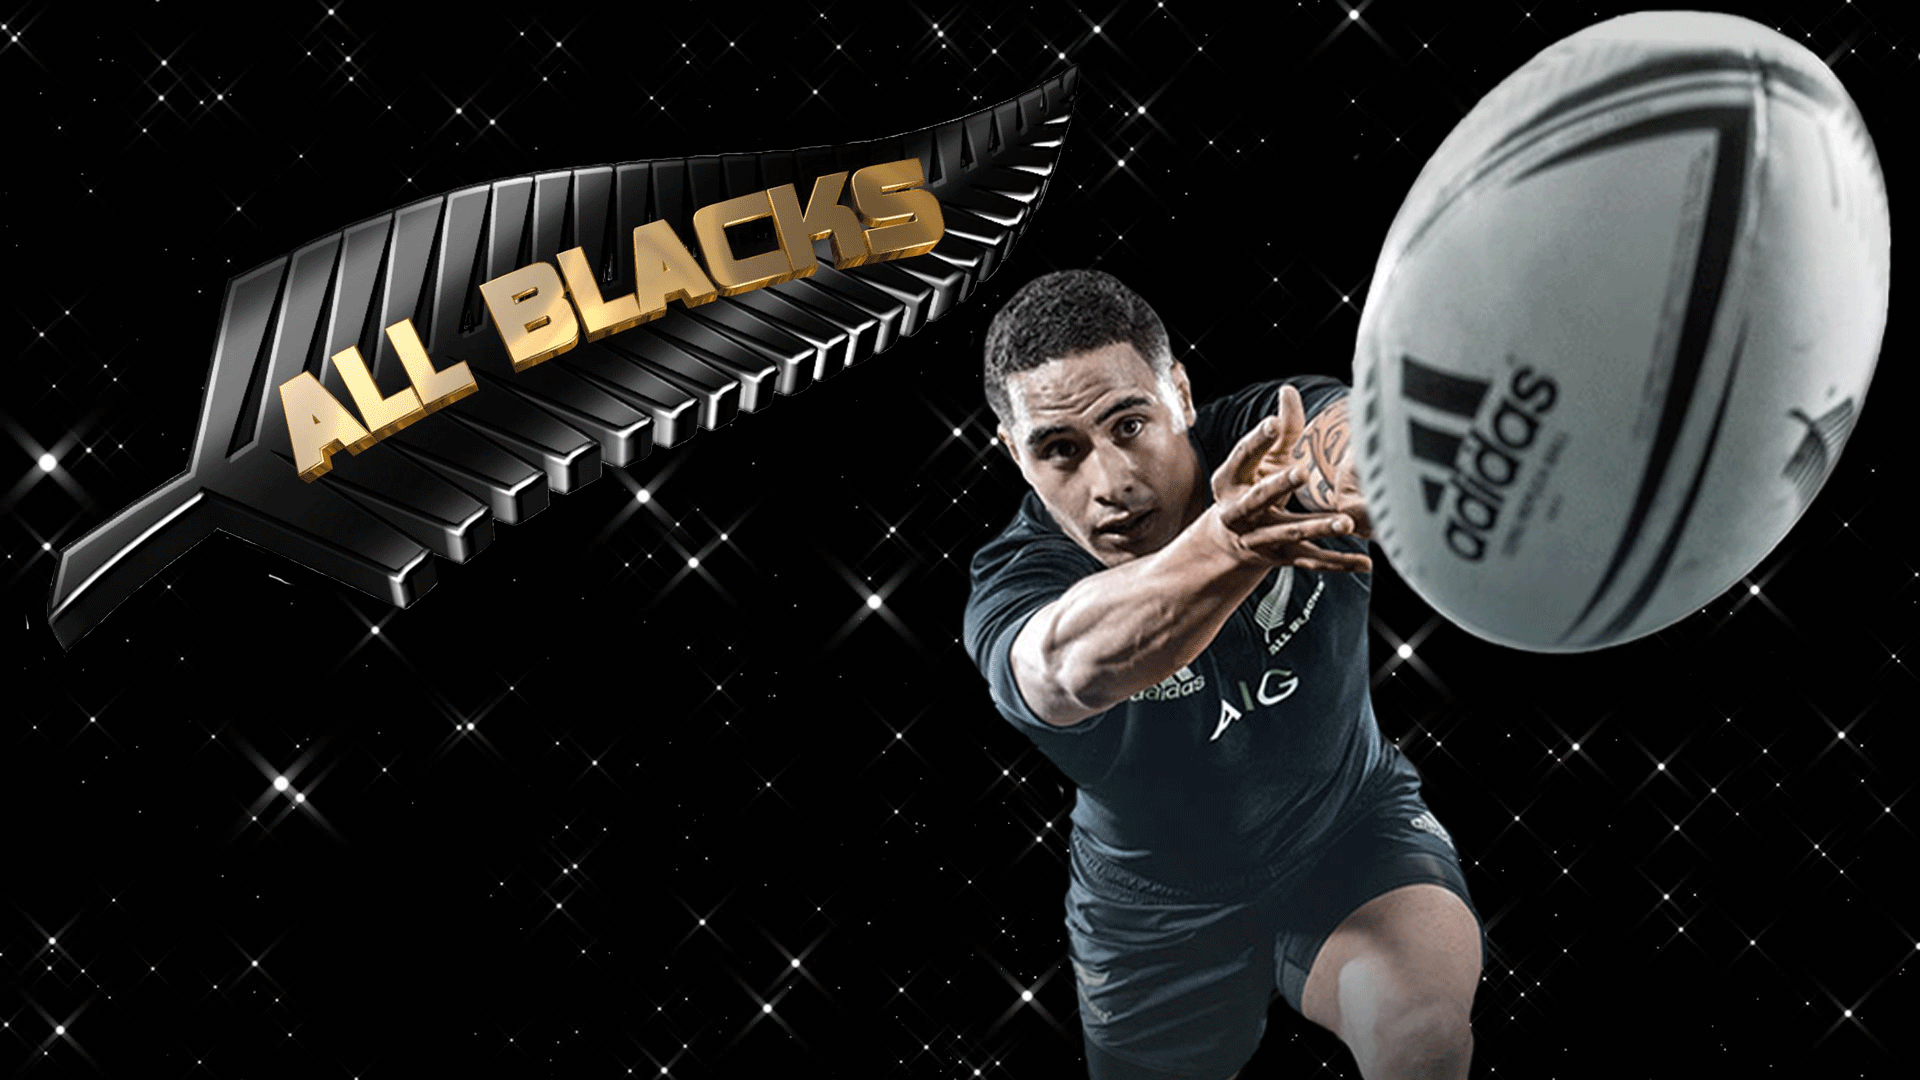 All Blacks rugby “Wallpaper” created by Gordon Tunstall using Adobe Photohop 2015